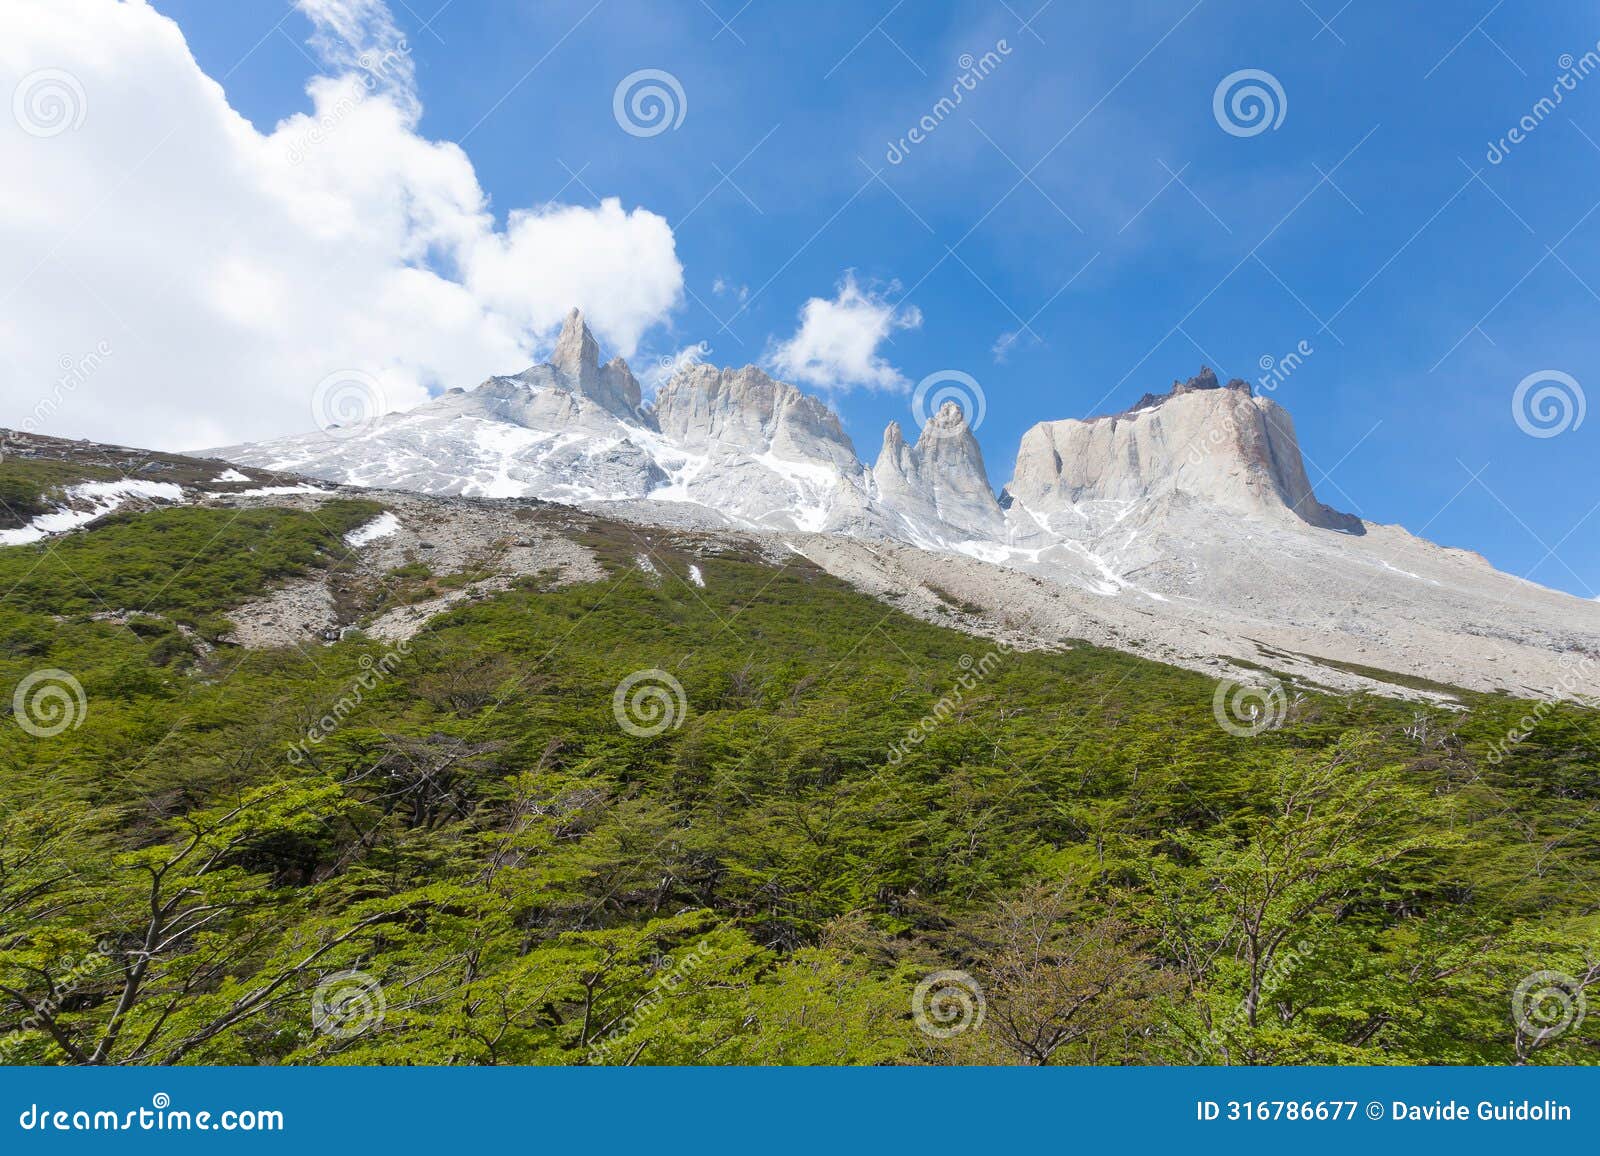 french valley landscape, torres del paine, chile